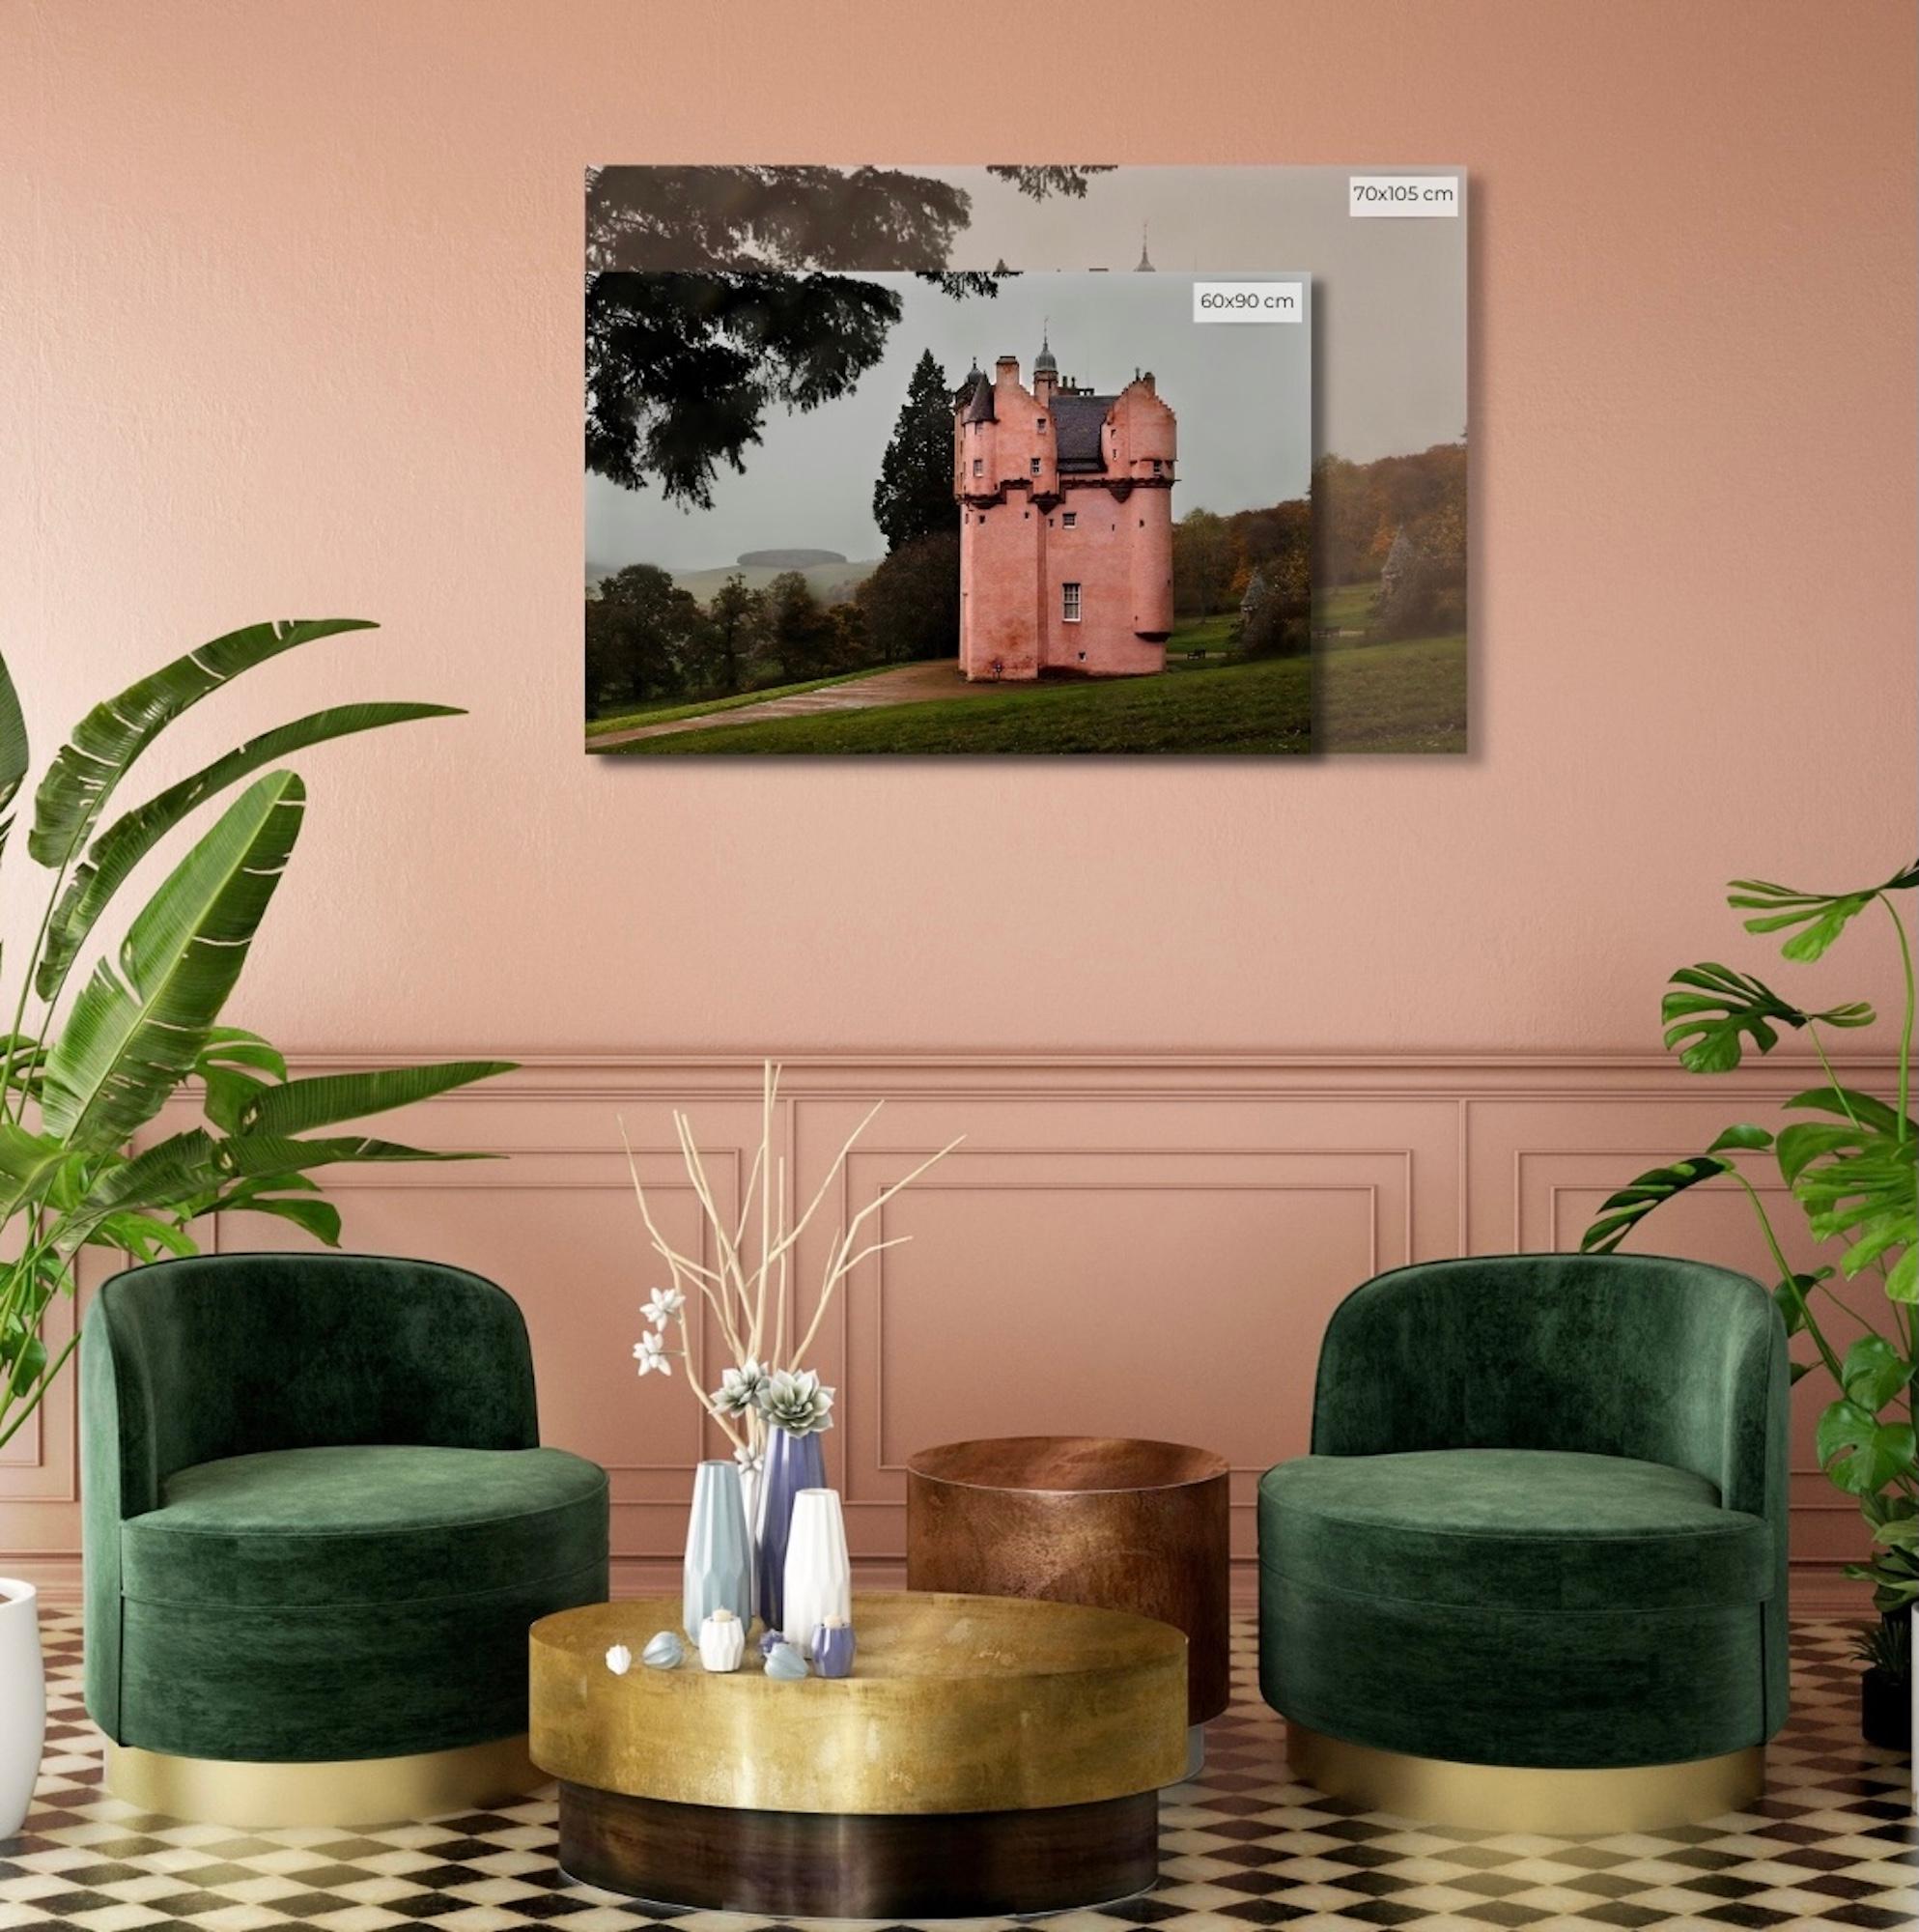 Pink Castle is a limited-edition photograph by French contemporary artist Christophe Jacrot. 
This photograph is part of the series ‘Wet Scotland’, in this image the protagonist is the castle of Cragievar in Scotland, baronial style, whose pink